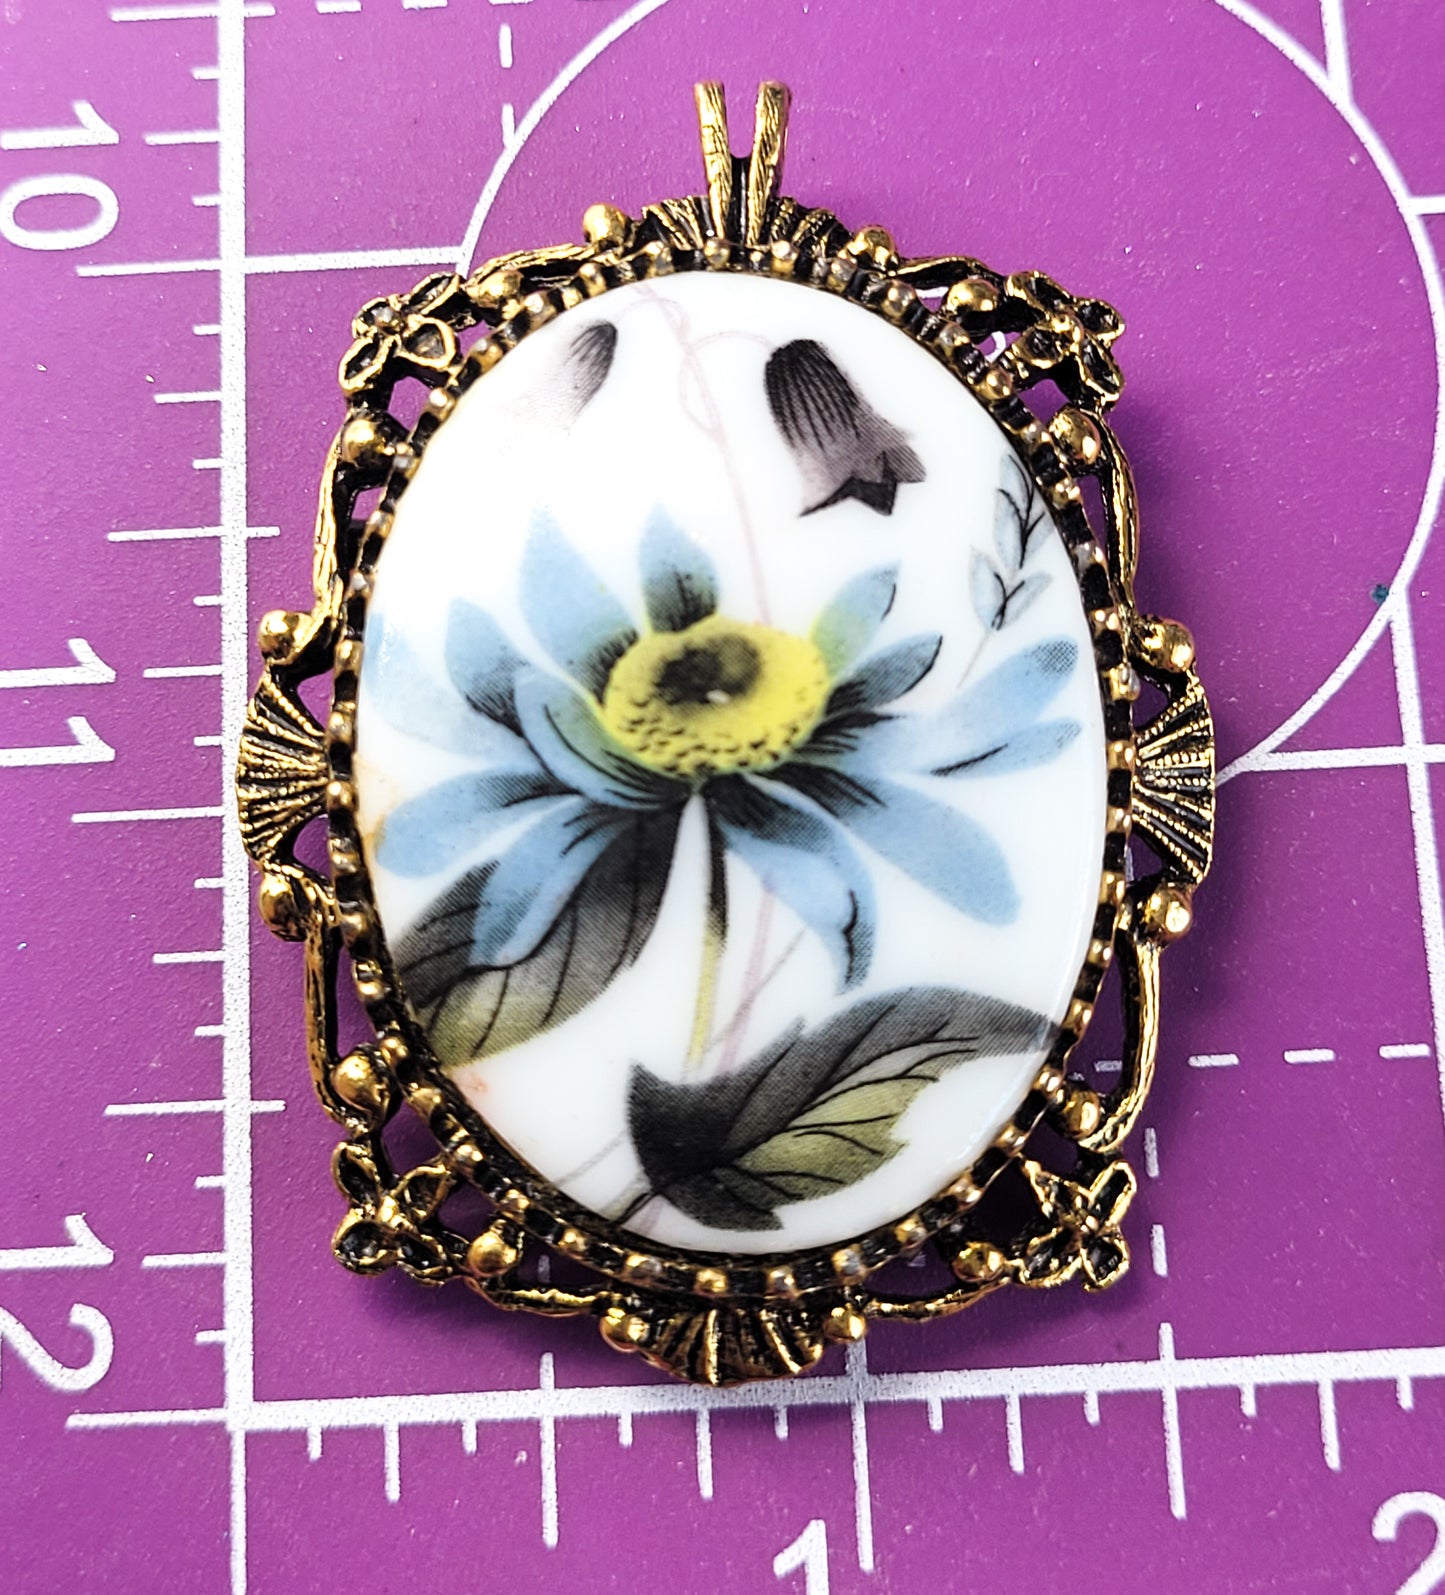 Blue Daisy flower painted cameo vintage gold toned pendant brooch